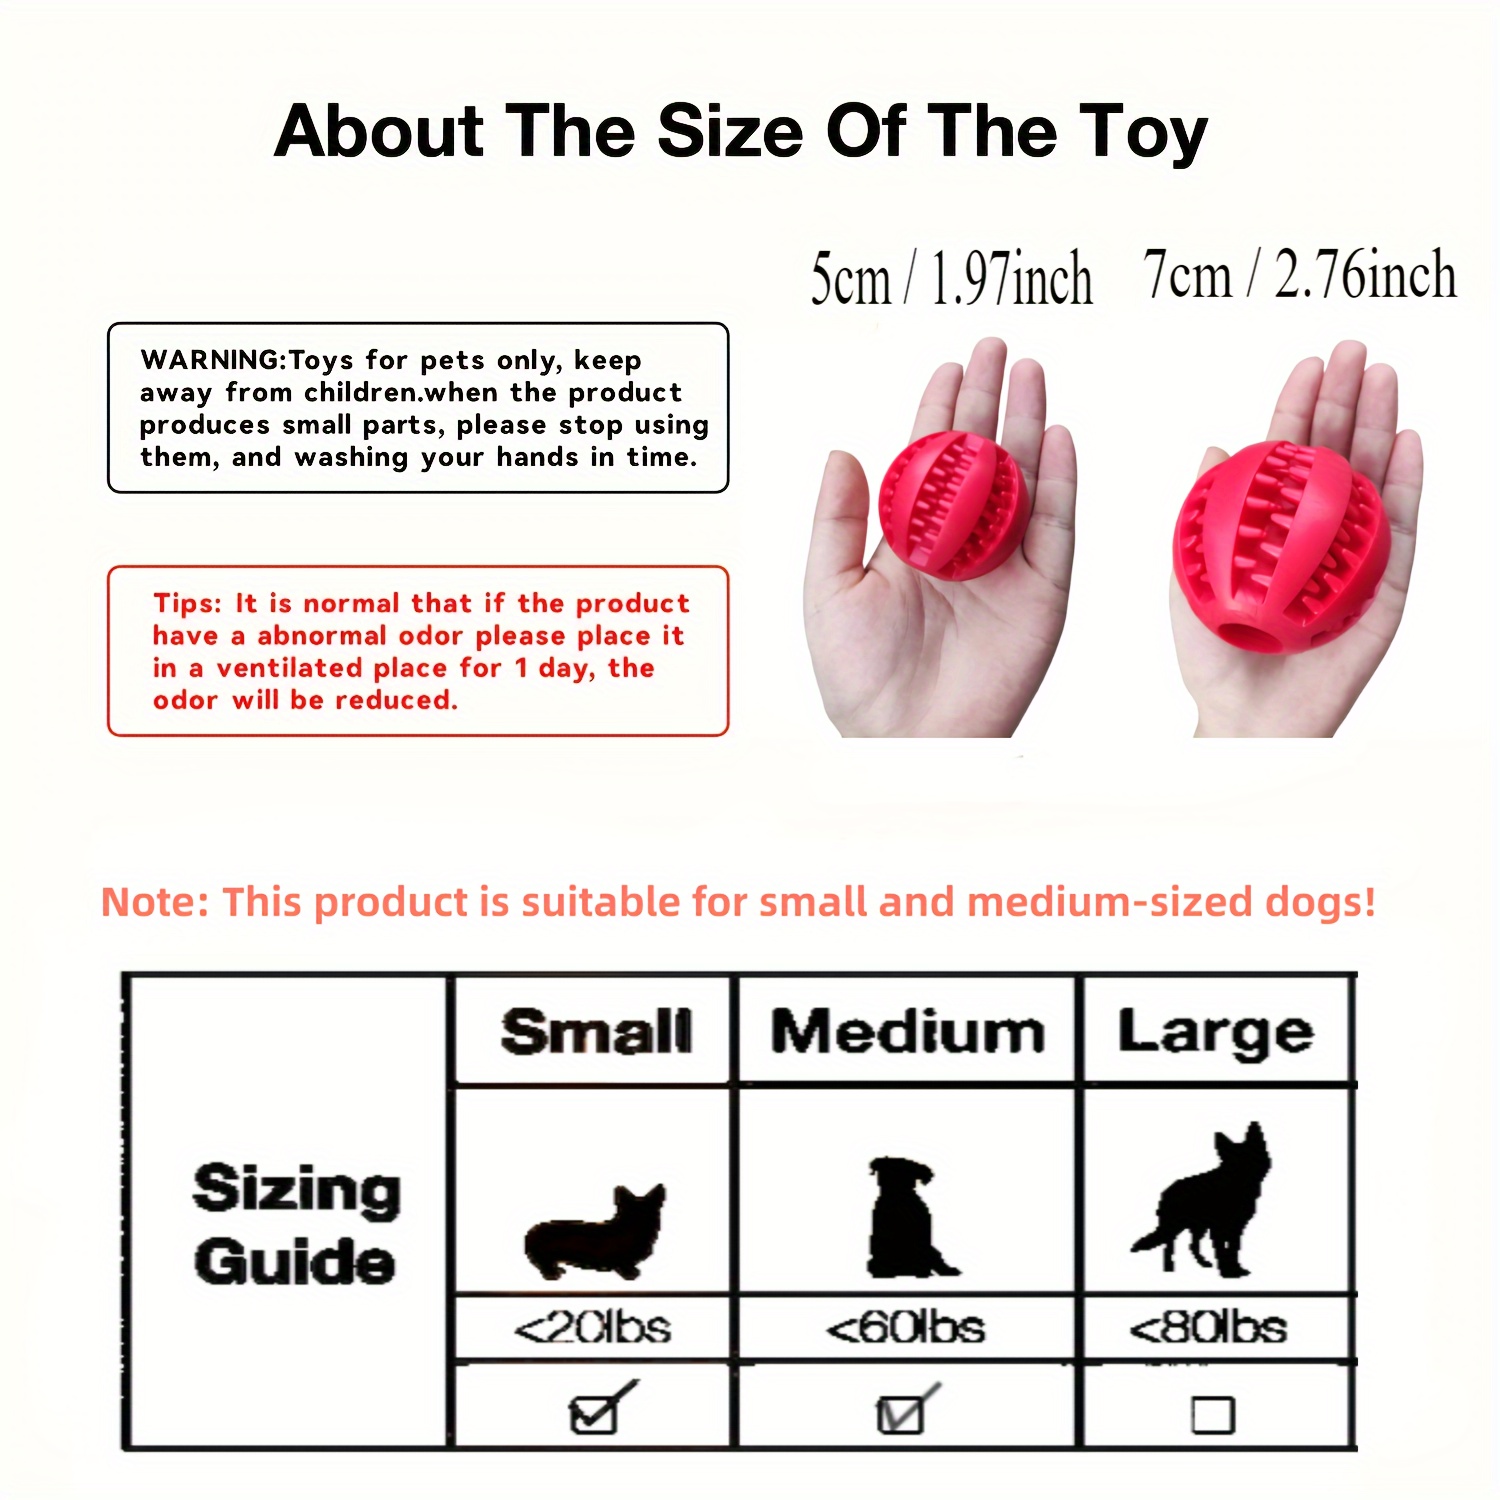 Dog Ball Toys for Small Dogs Interactive Elasticity Puppy Chew Toy Tooth  Cleaning Rubber Food Ball Toy Pet Stuff Accessories